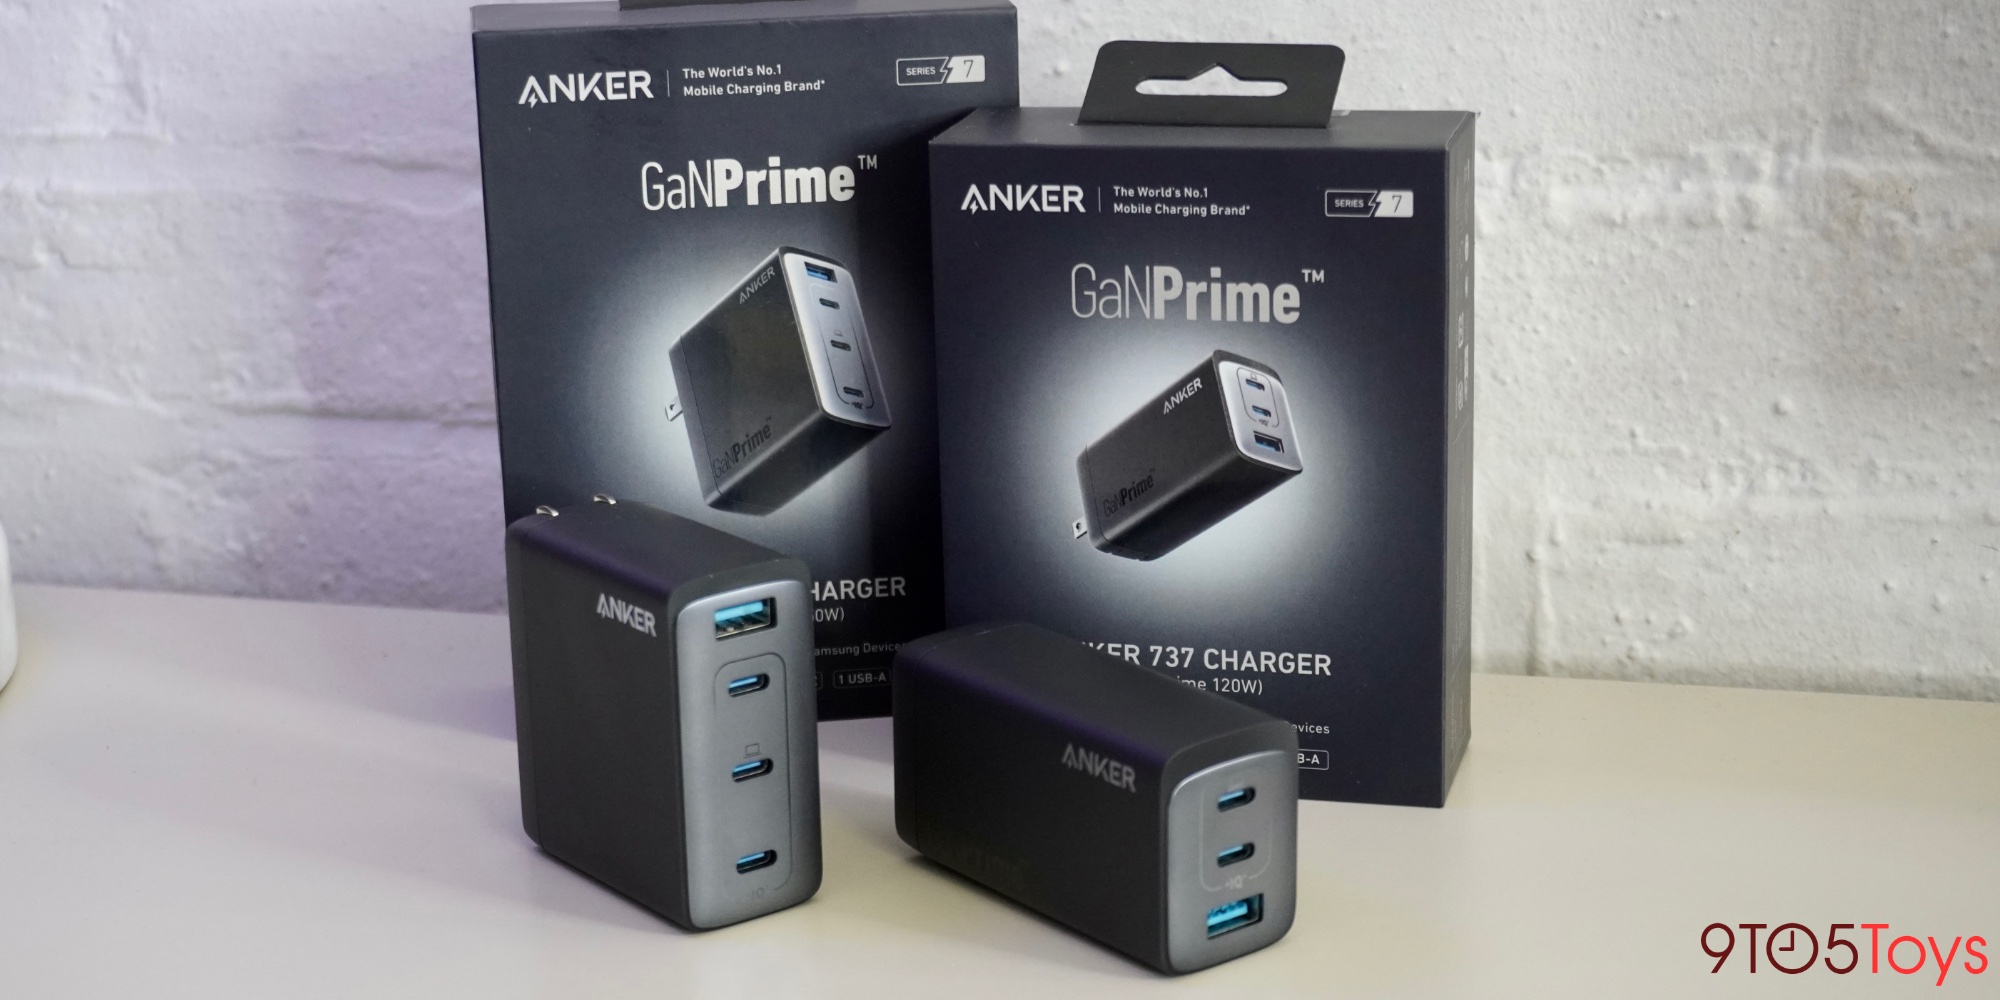 Anker GaNPrime USB-C charger lineup debuts with six new models